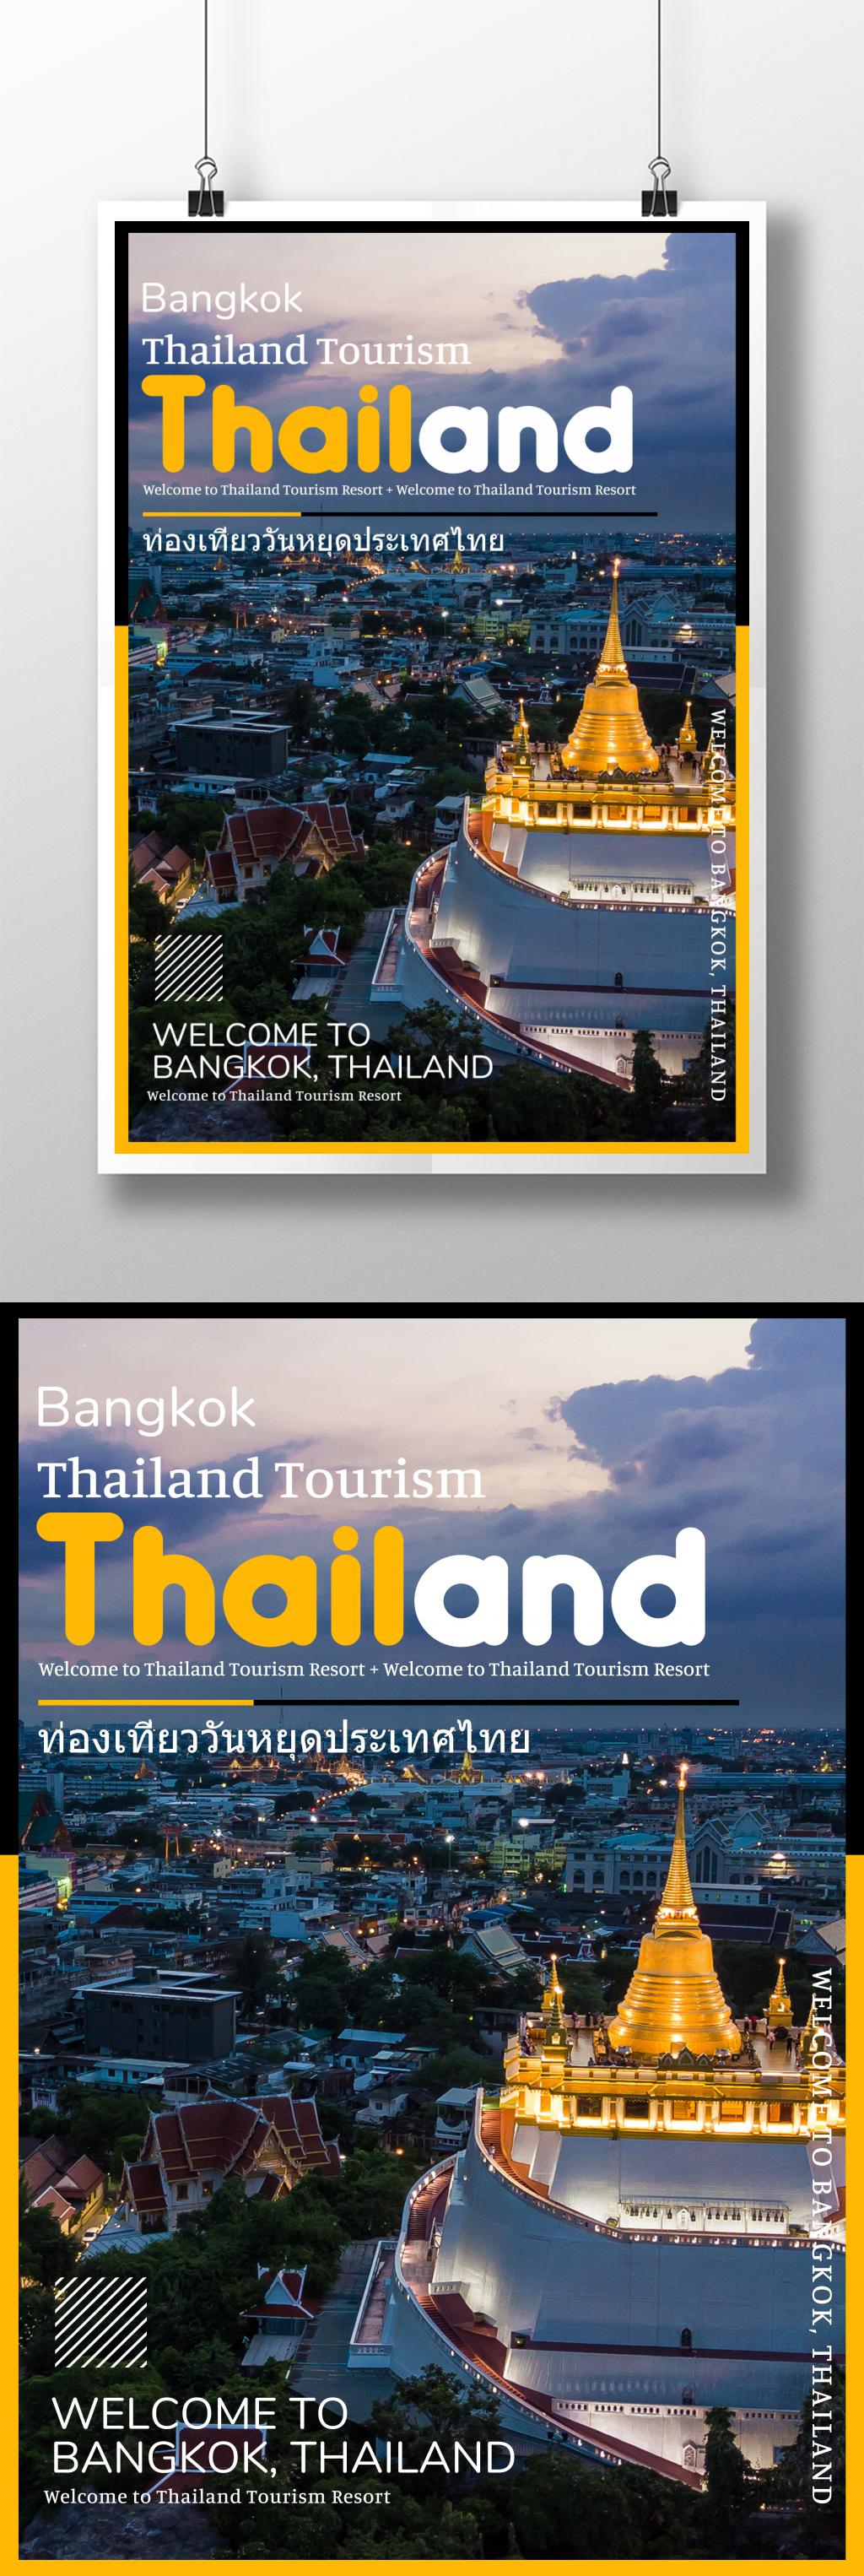 Thailand bangkok travel poster design template image_picture free